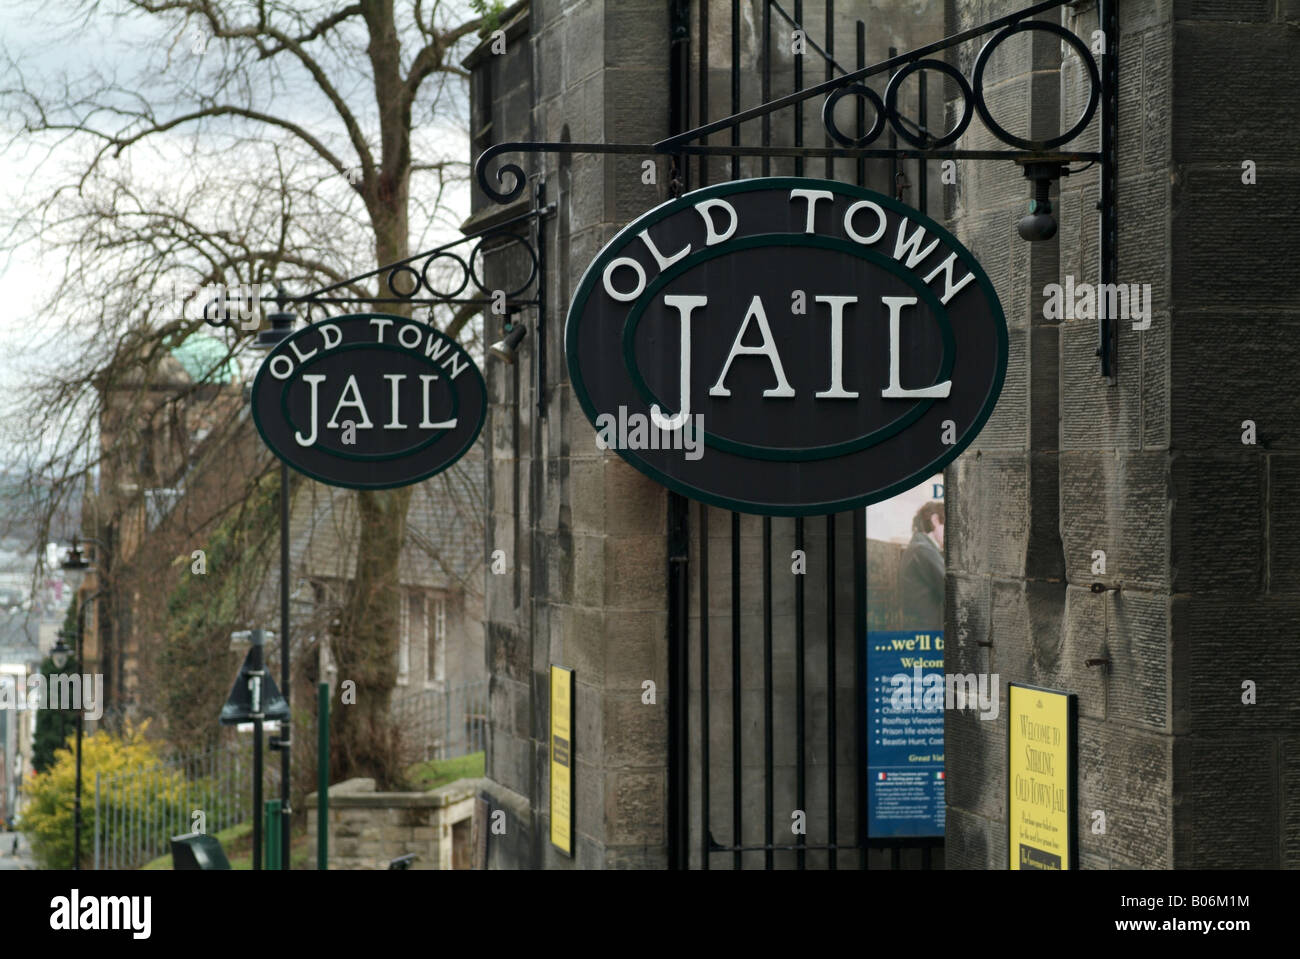 The entrance to the Old Town Jail, Stirling. Stock Photo